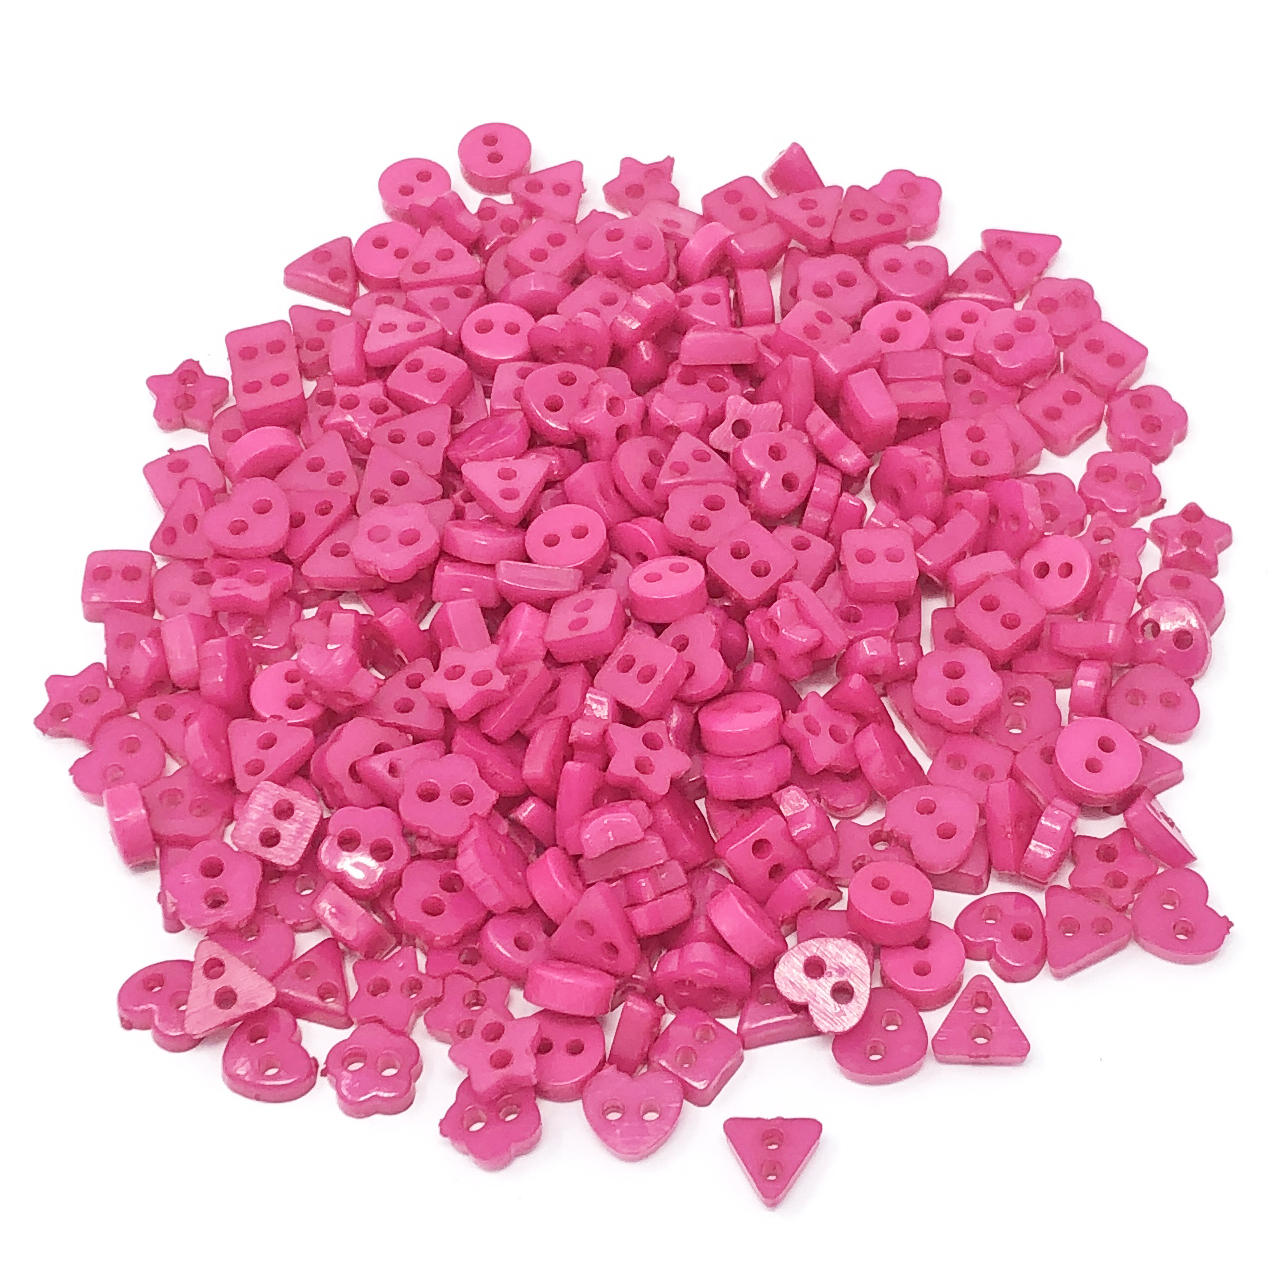 Bright Pink 6mm Mixed Shape Multicoloured Resin Buttons - Pack of 300